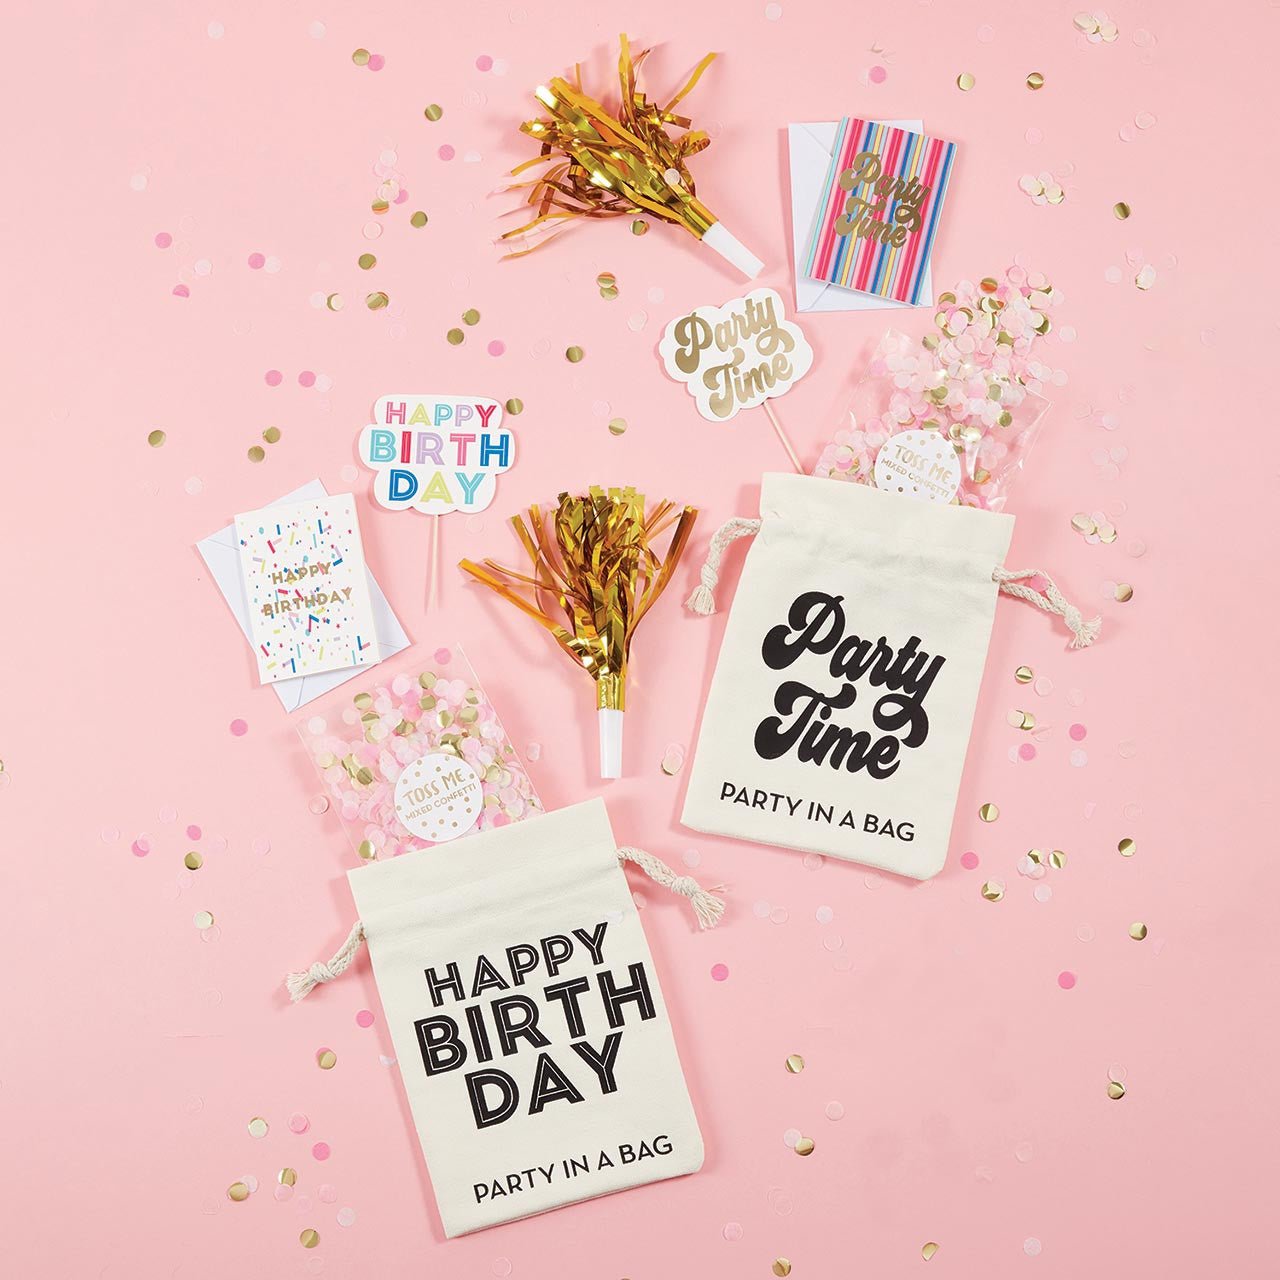 Happy Birthday Party In A Bag | Cake Topper, Confetti, Mini Card and Noisemaker